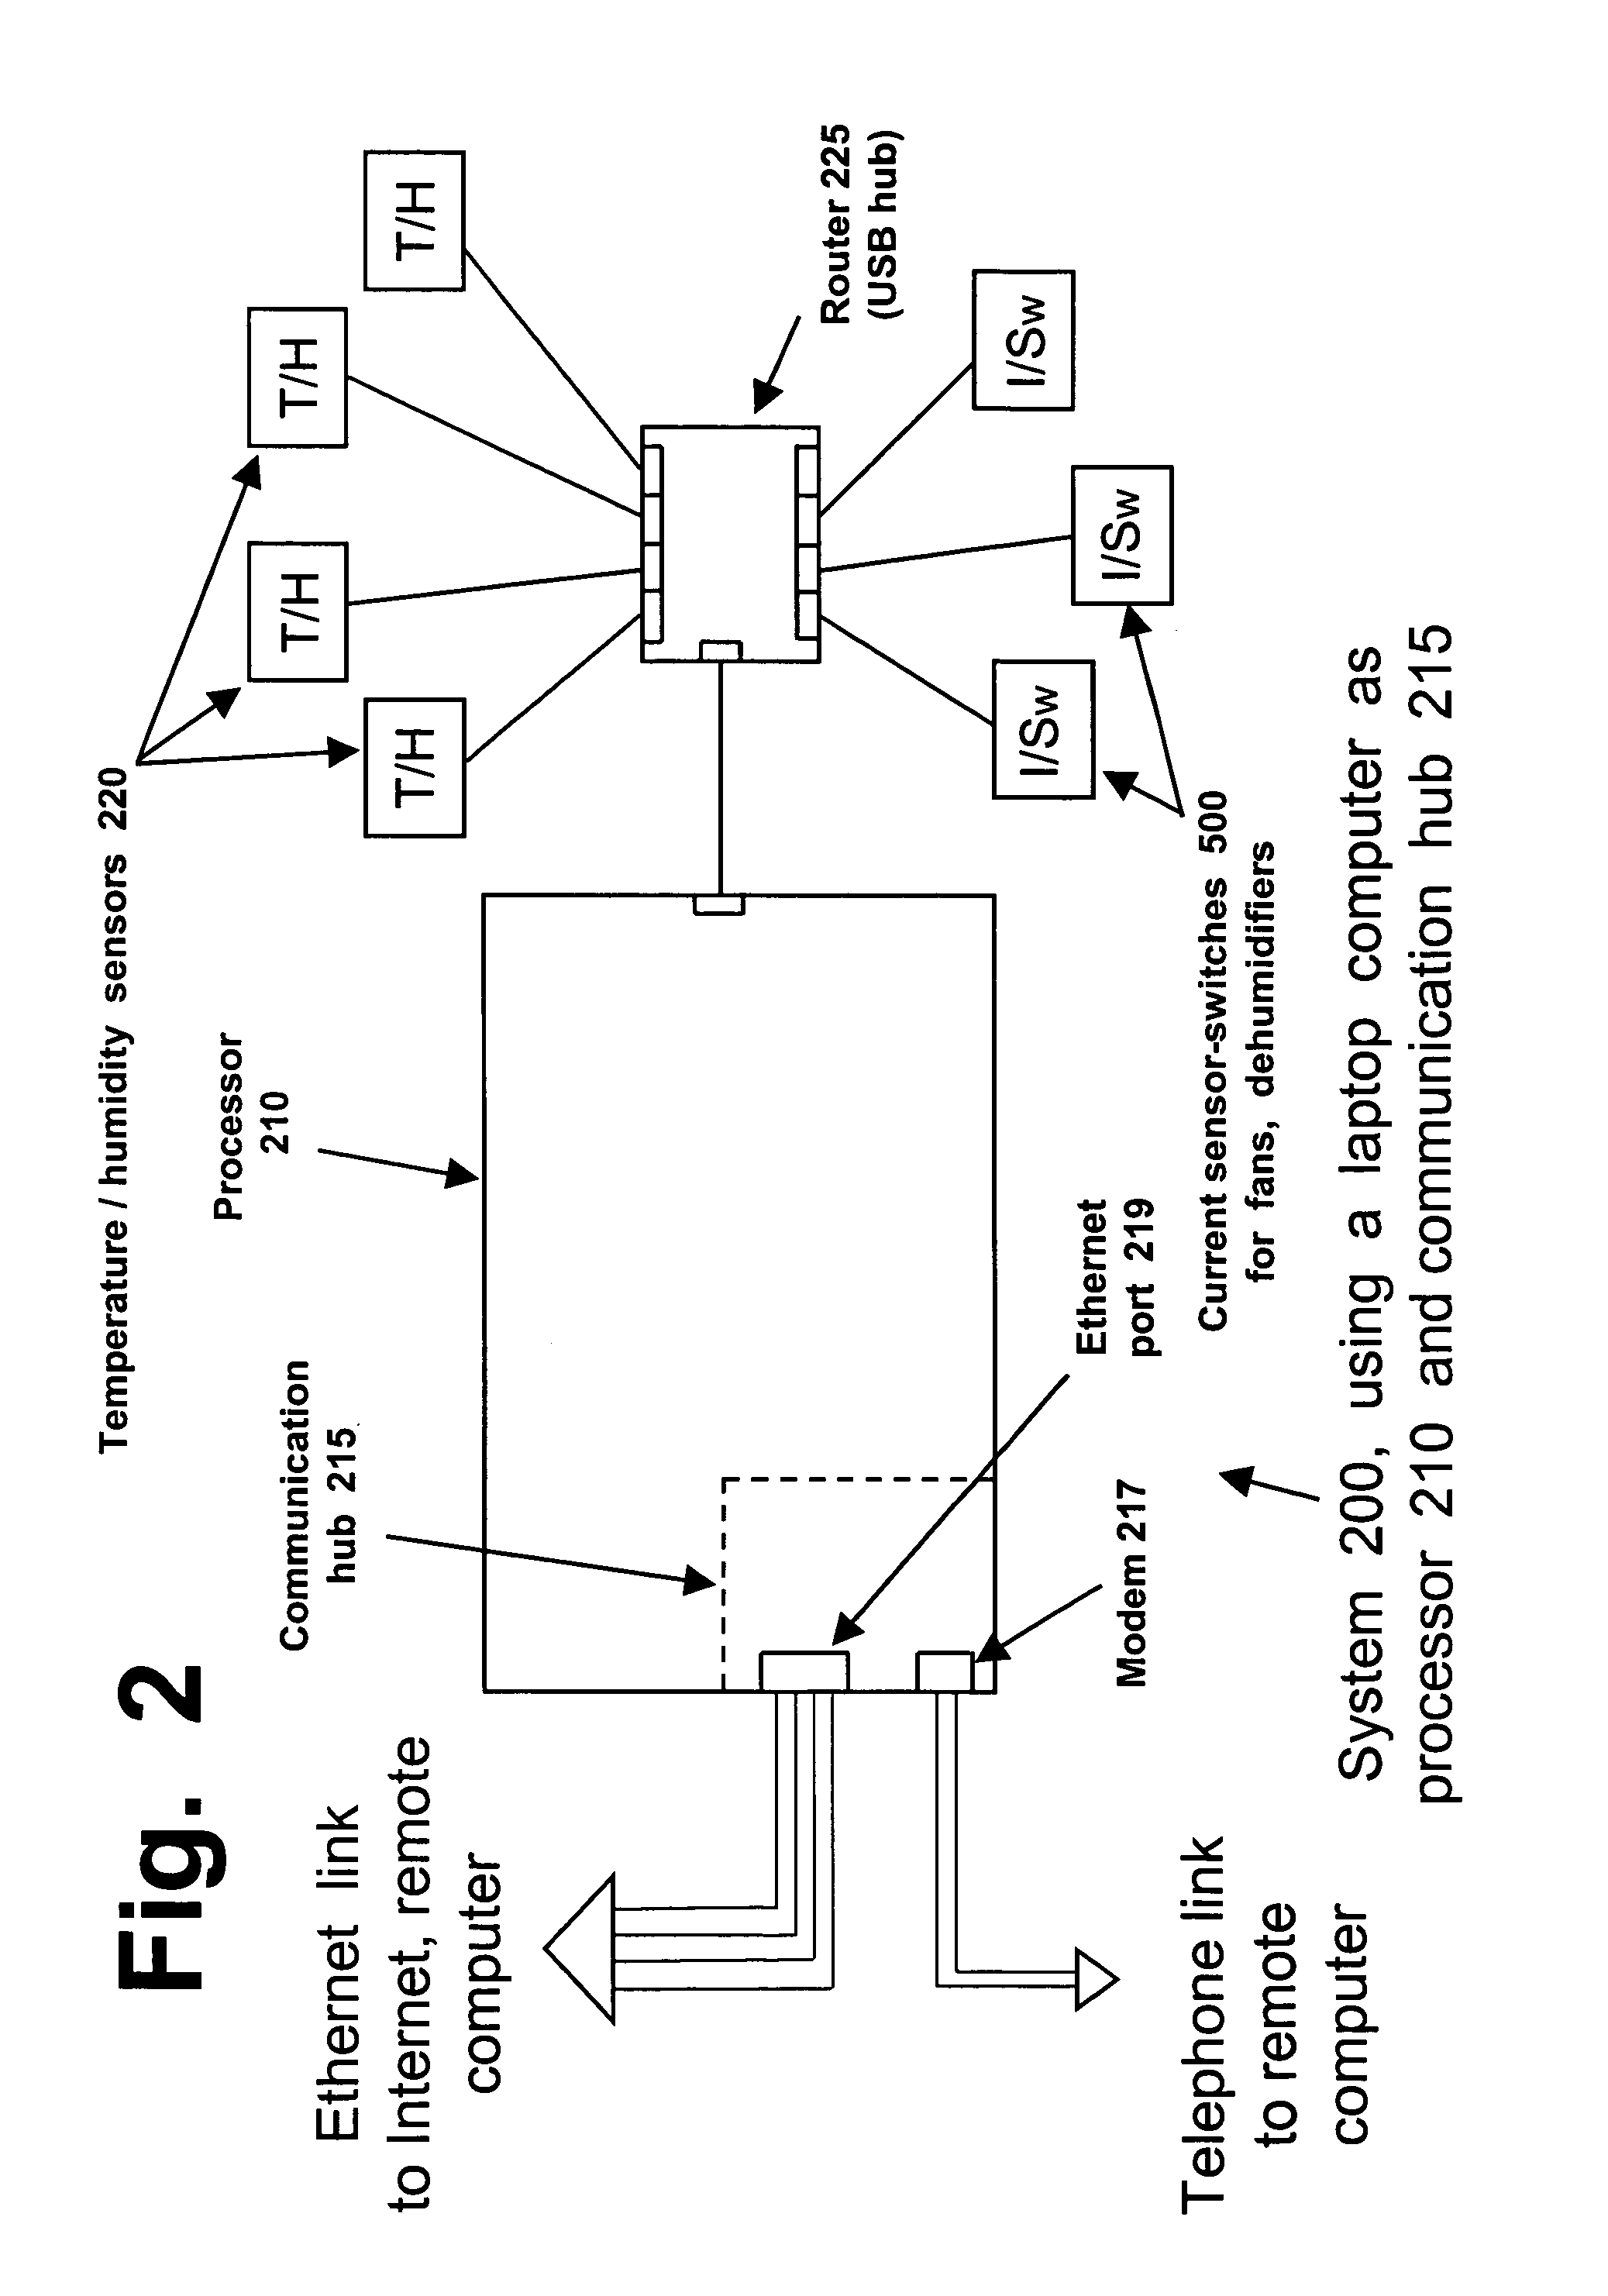 Devices and systems for remote and automated monitoring and control of water removal, mold remediation, and similar work